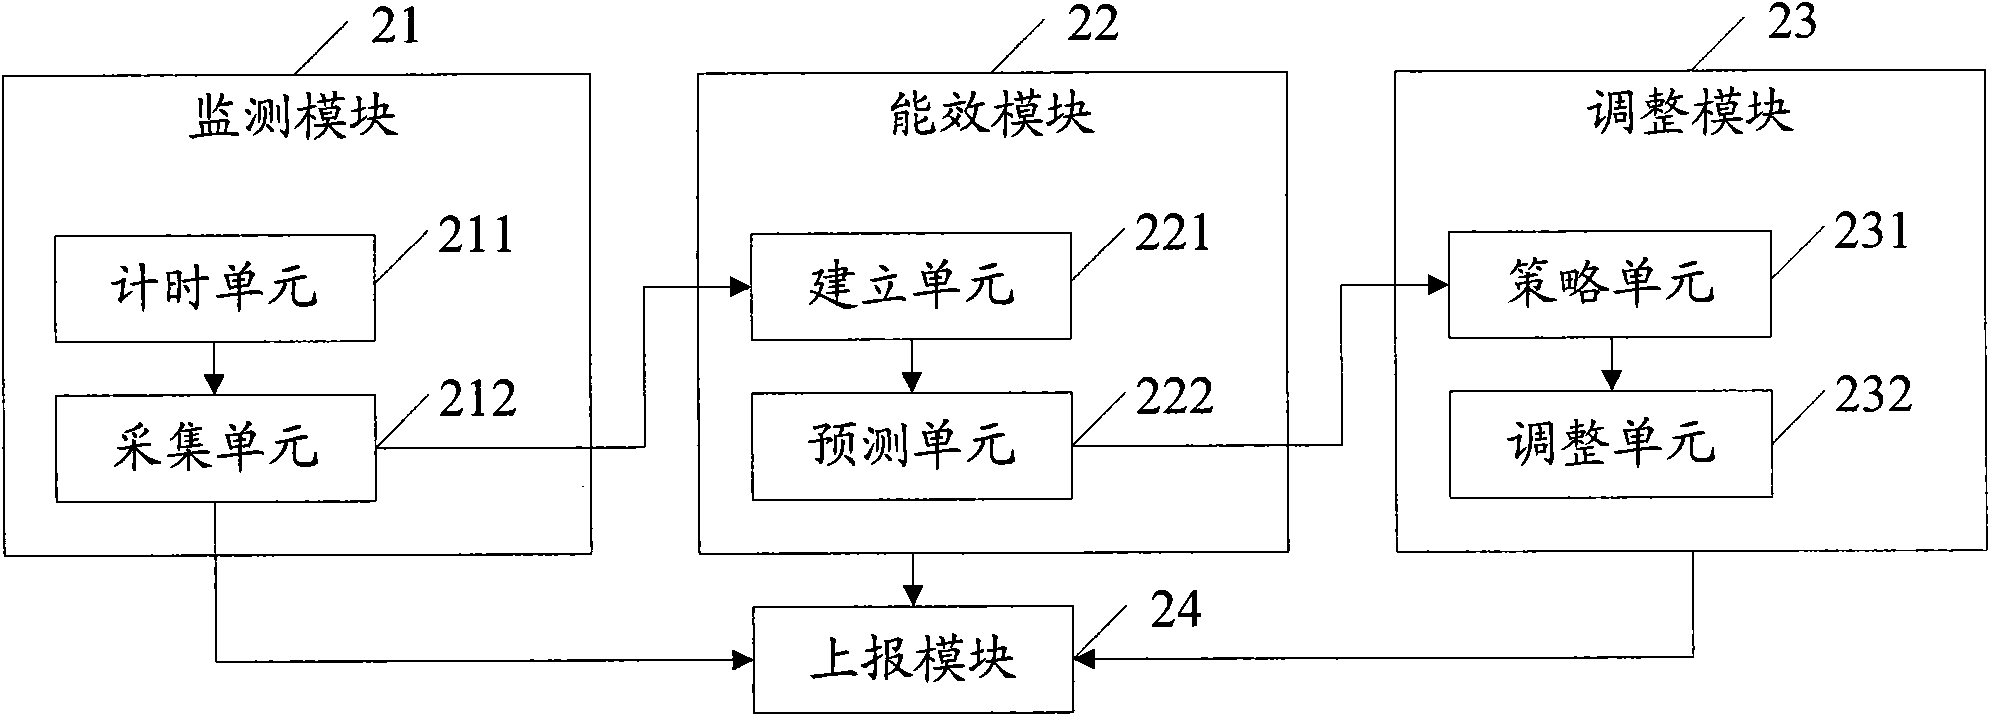 Method and device for controlling energy efficiency of communication system, service processing unit and service processing system